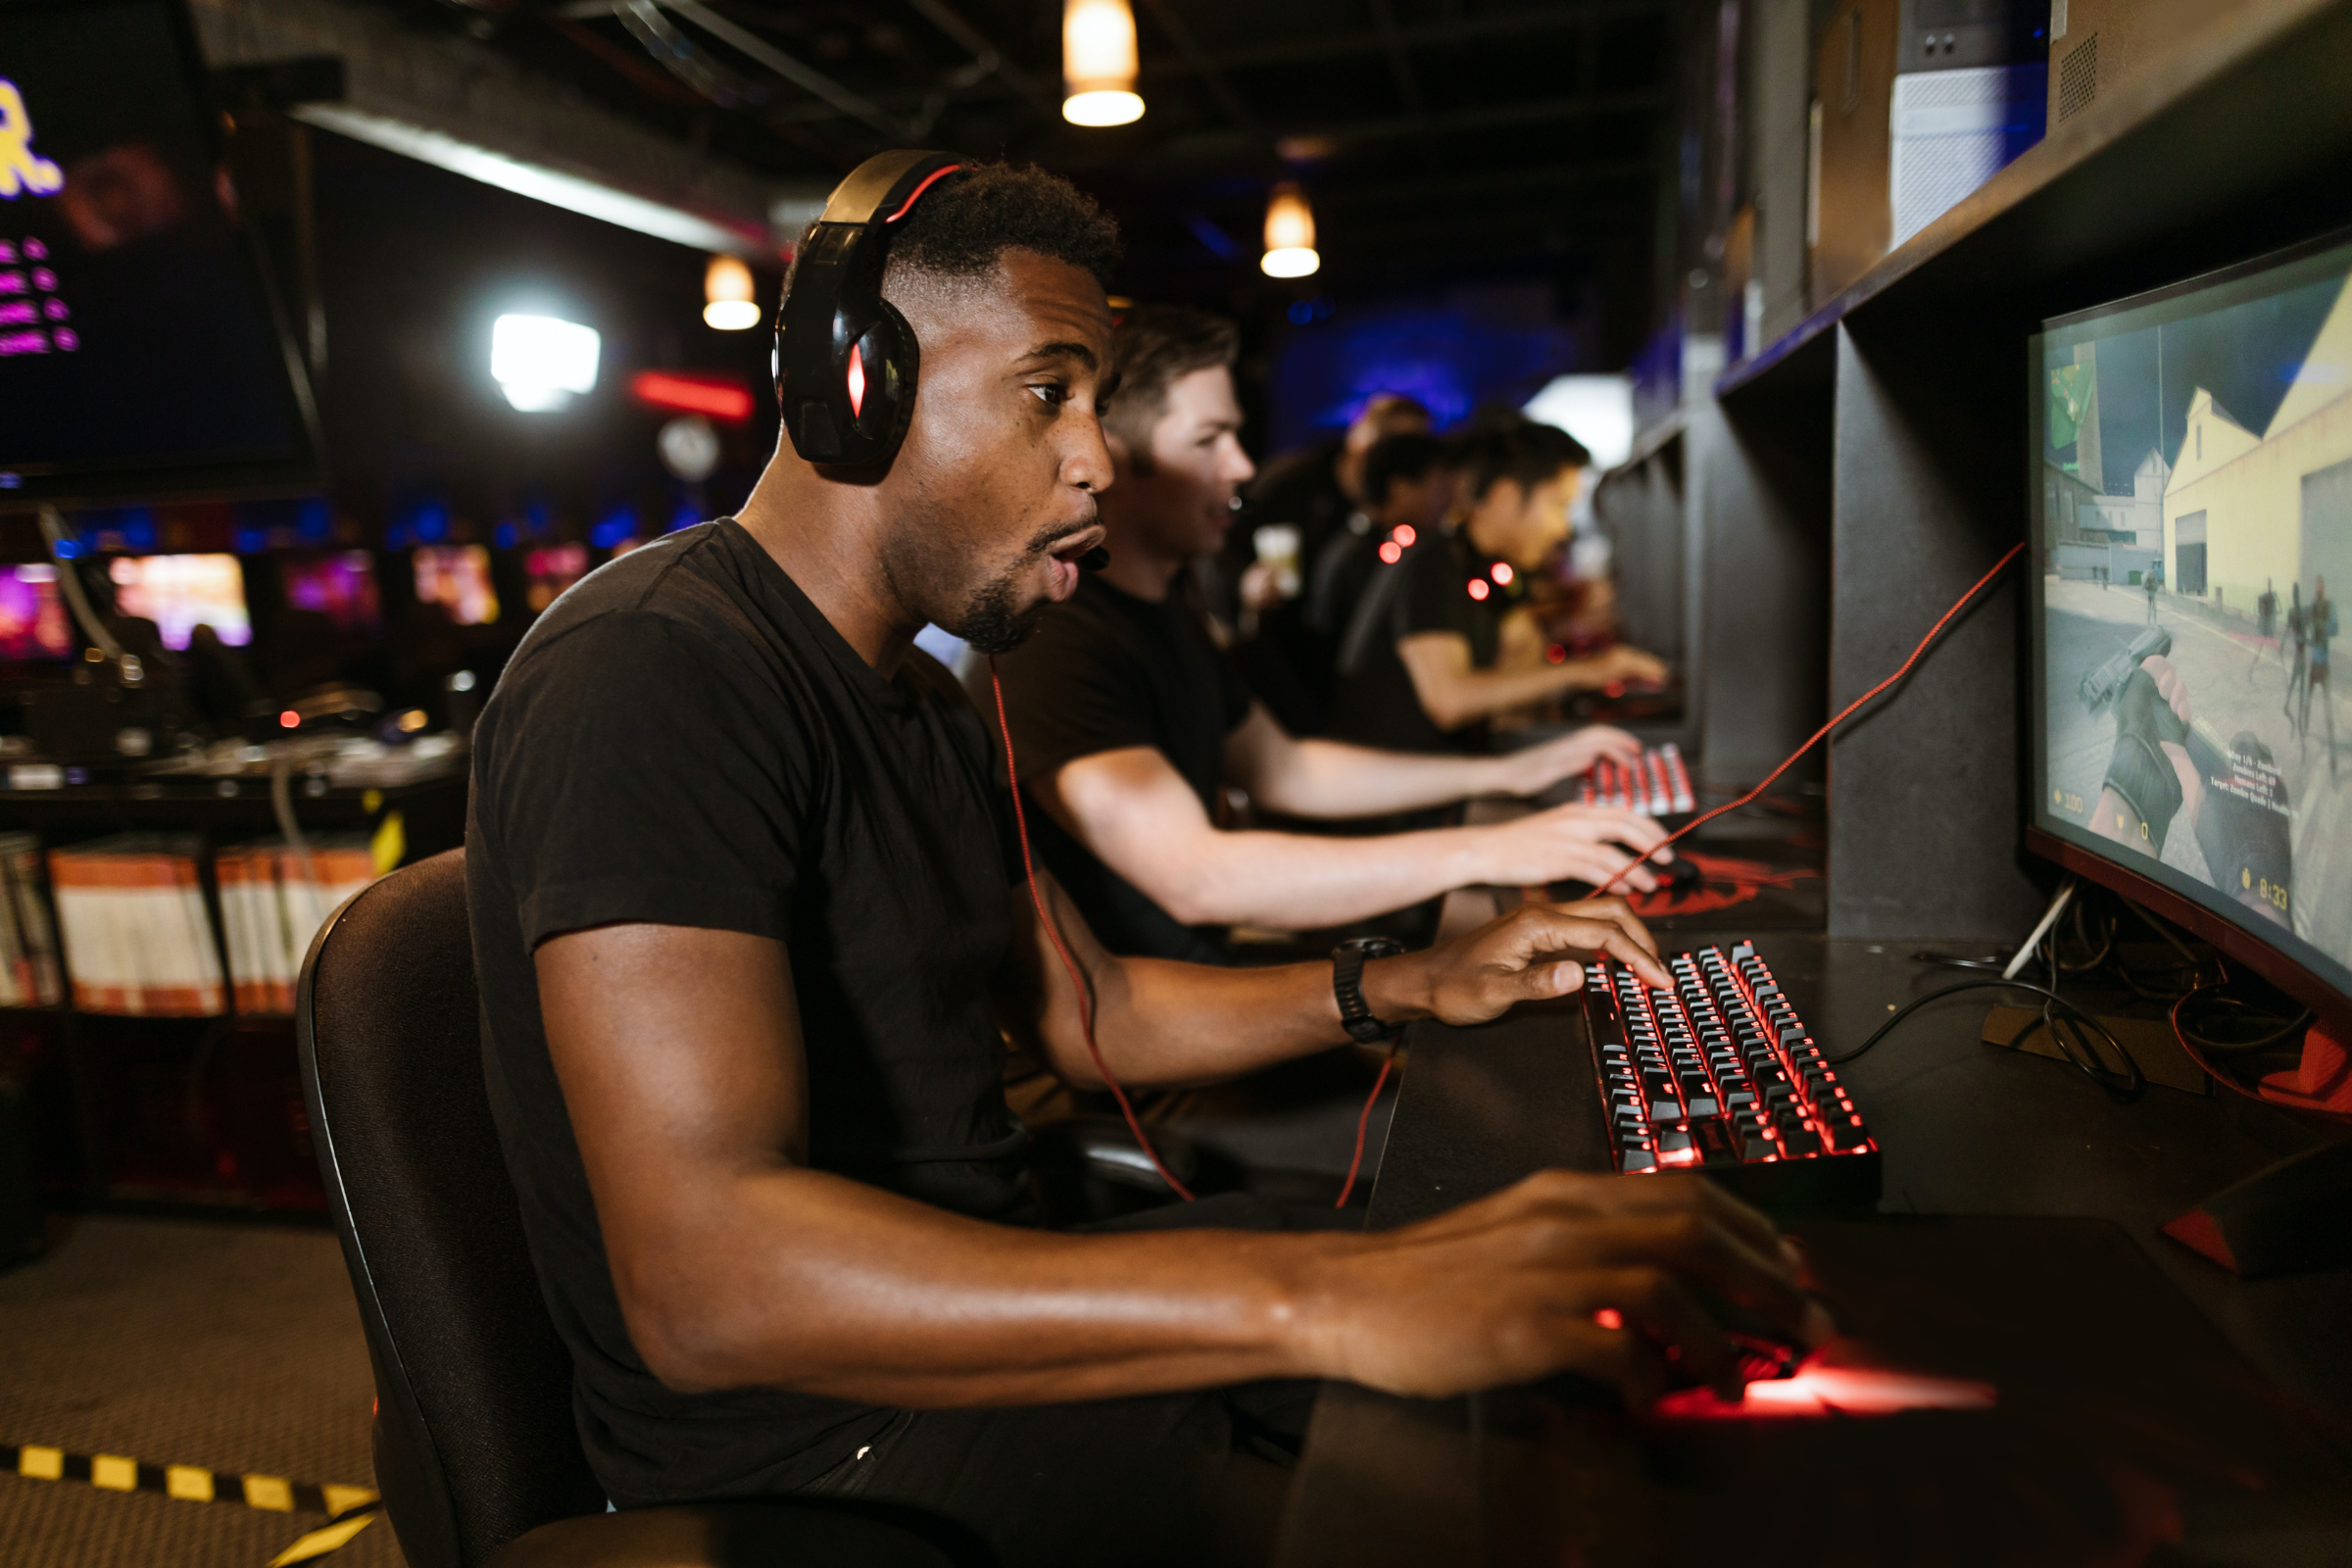 A team of gamers all playing computer games in a row. In the forground is a black man in his 20s, wearing a black t shirt and headphones. He has an excited and focussed expression